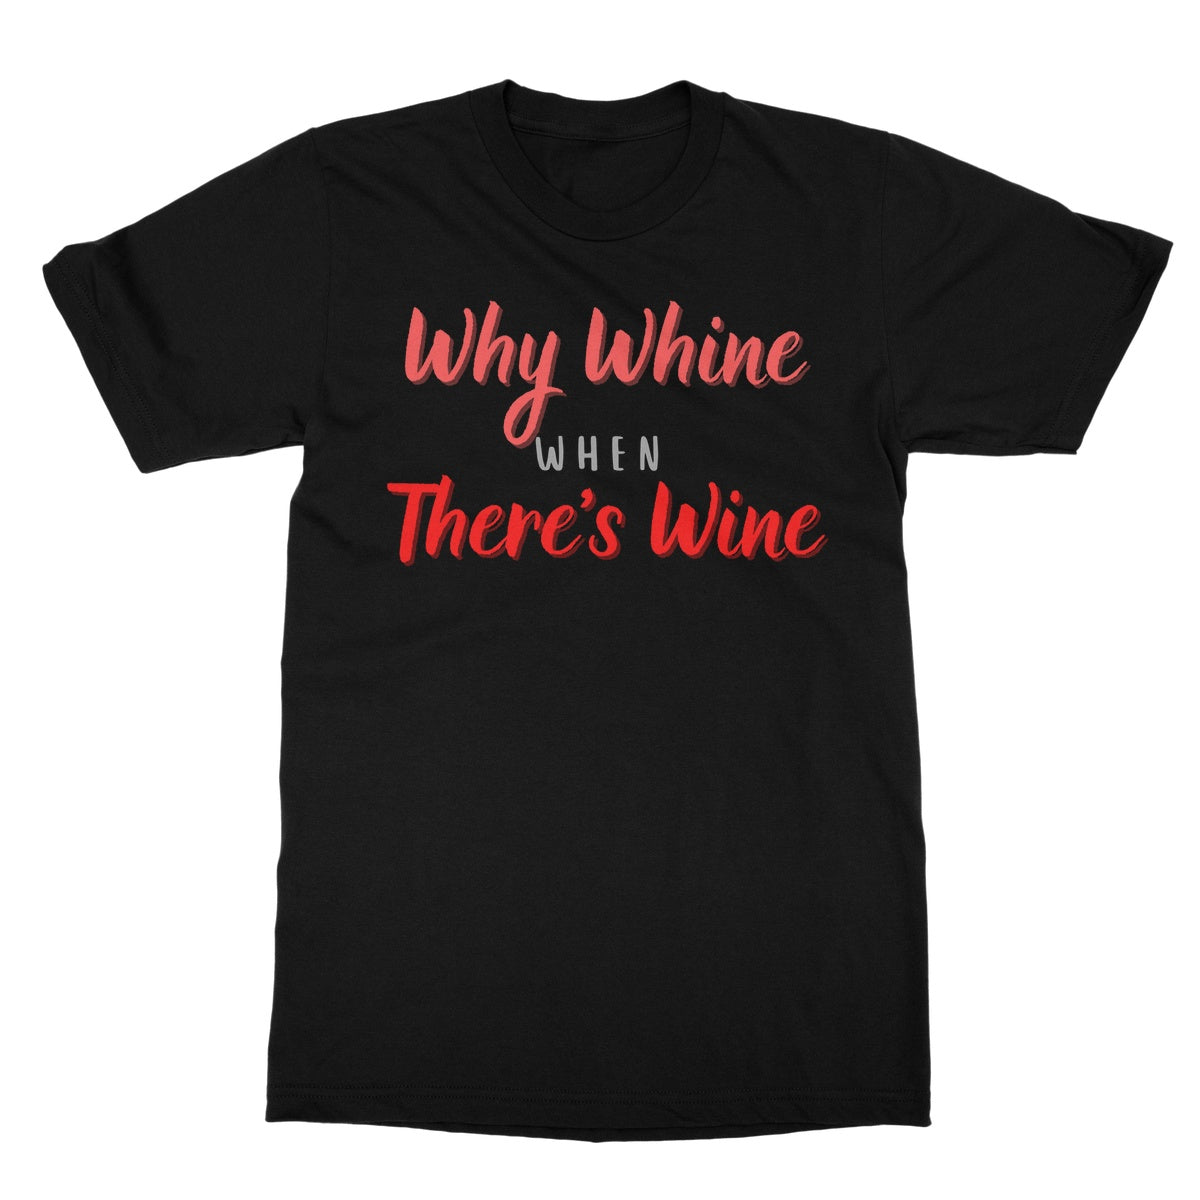 why whine when there's wine t shirt black